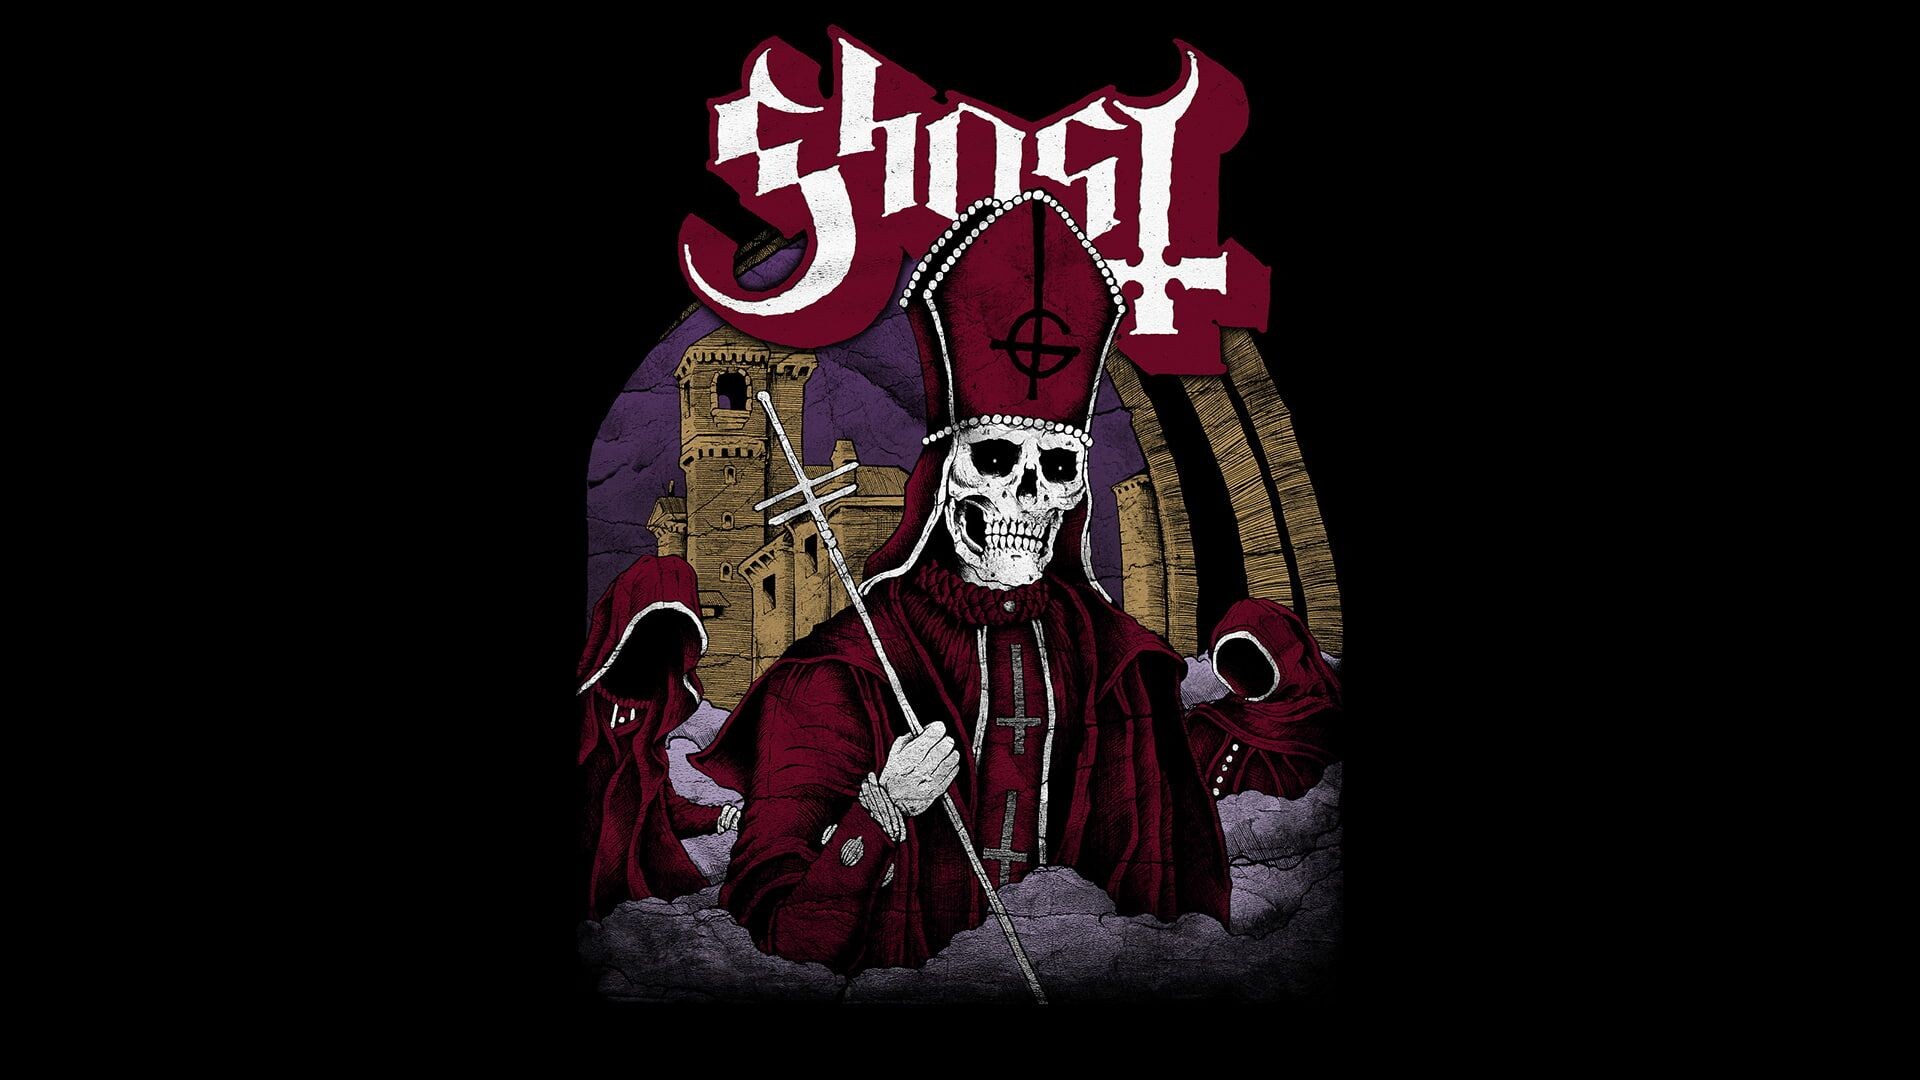 Ghost (Band): "Stand by Him" was released as the fifth track from Opus Eponymous. 1920x1080 Full HD Wallpaper.